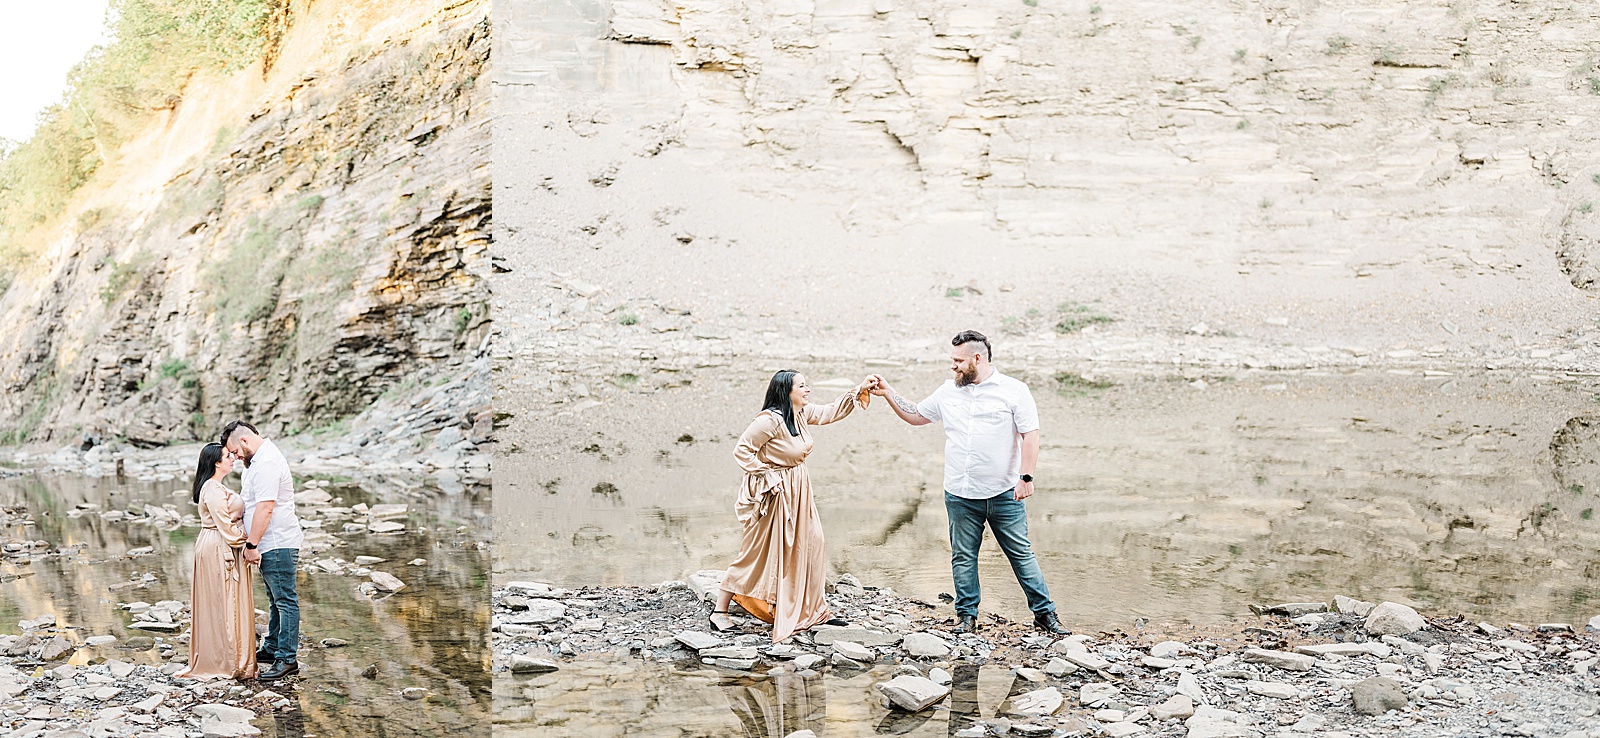 Canyon in Ohio Inspired Engagement-24.jpg